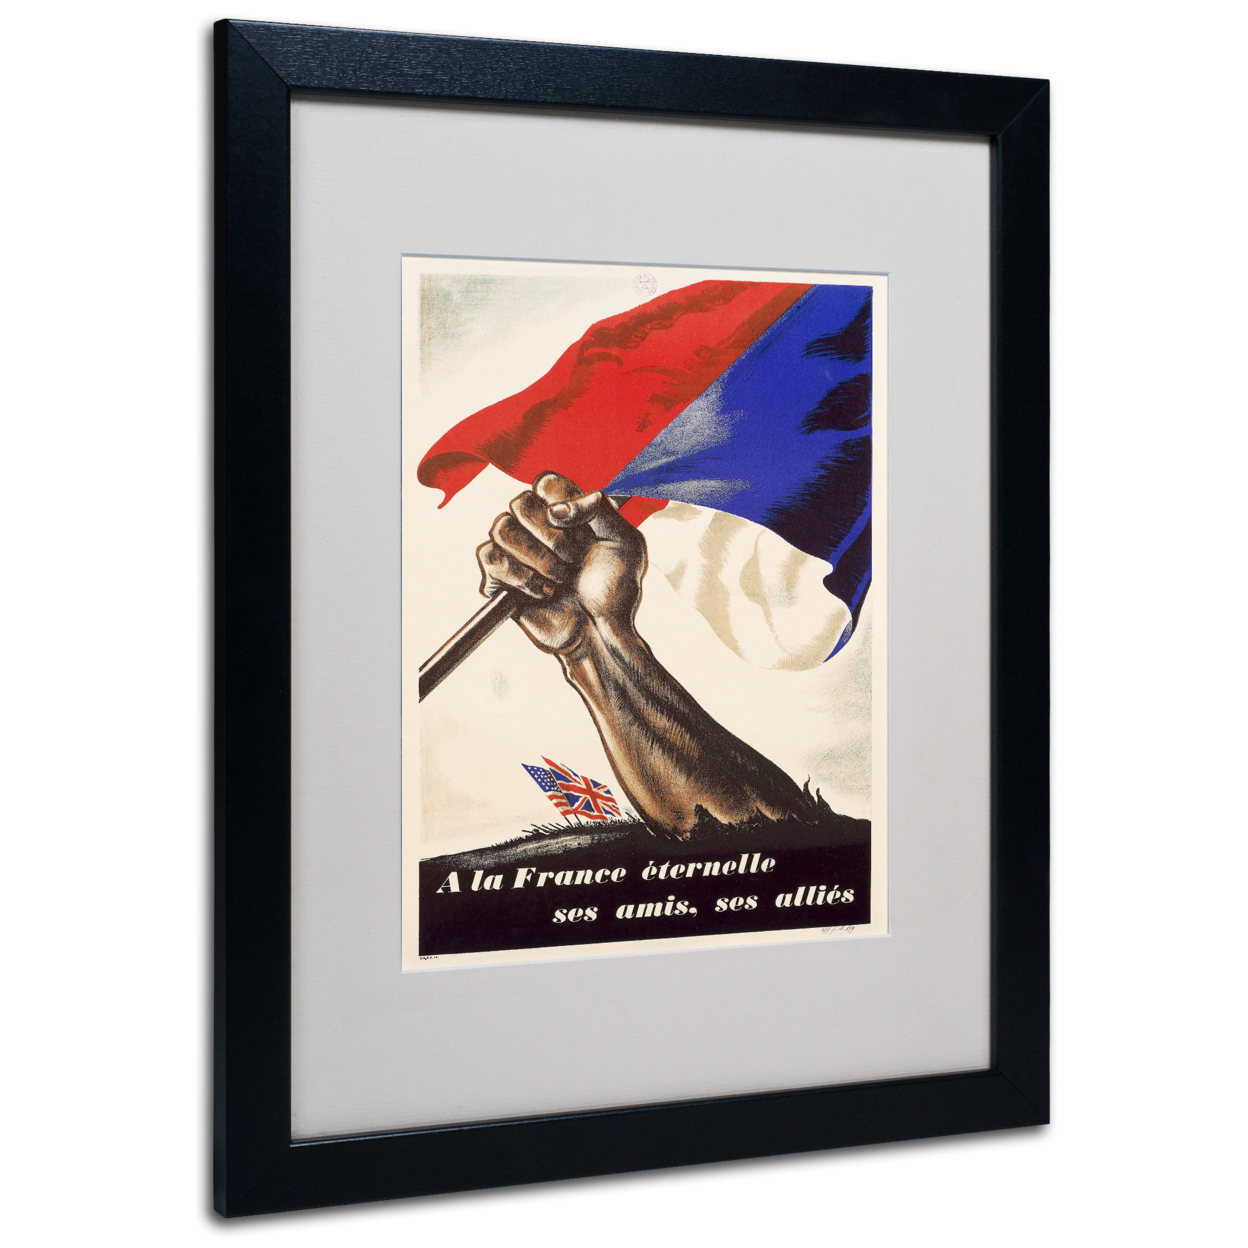 Poster For Liberation Of France' Black Wooden Framed Art 18 X 22 Inches